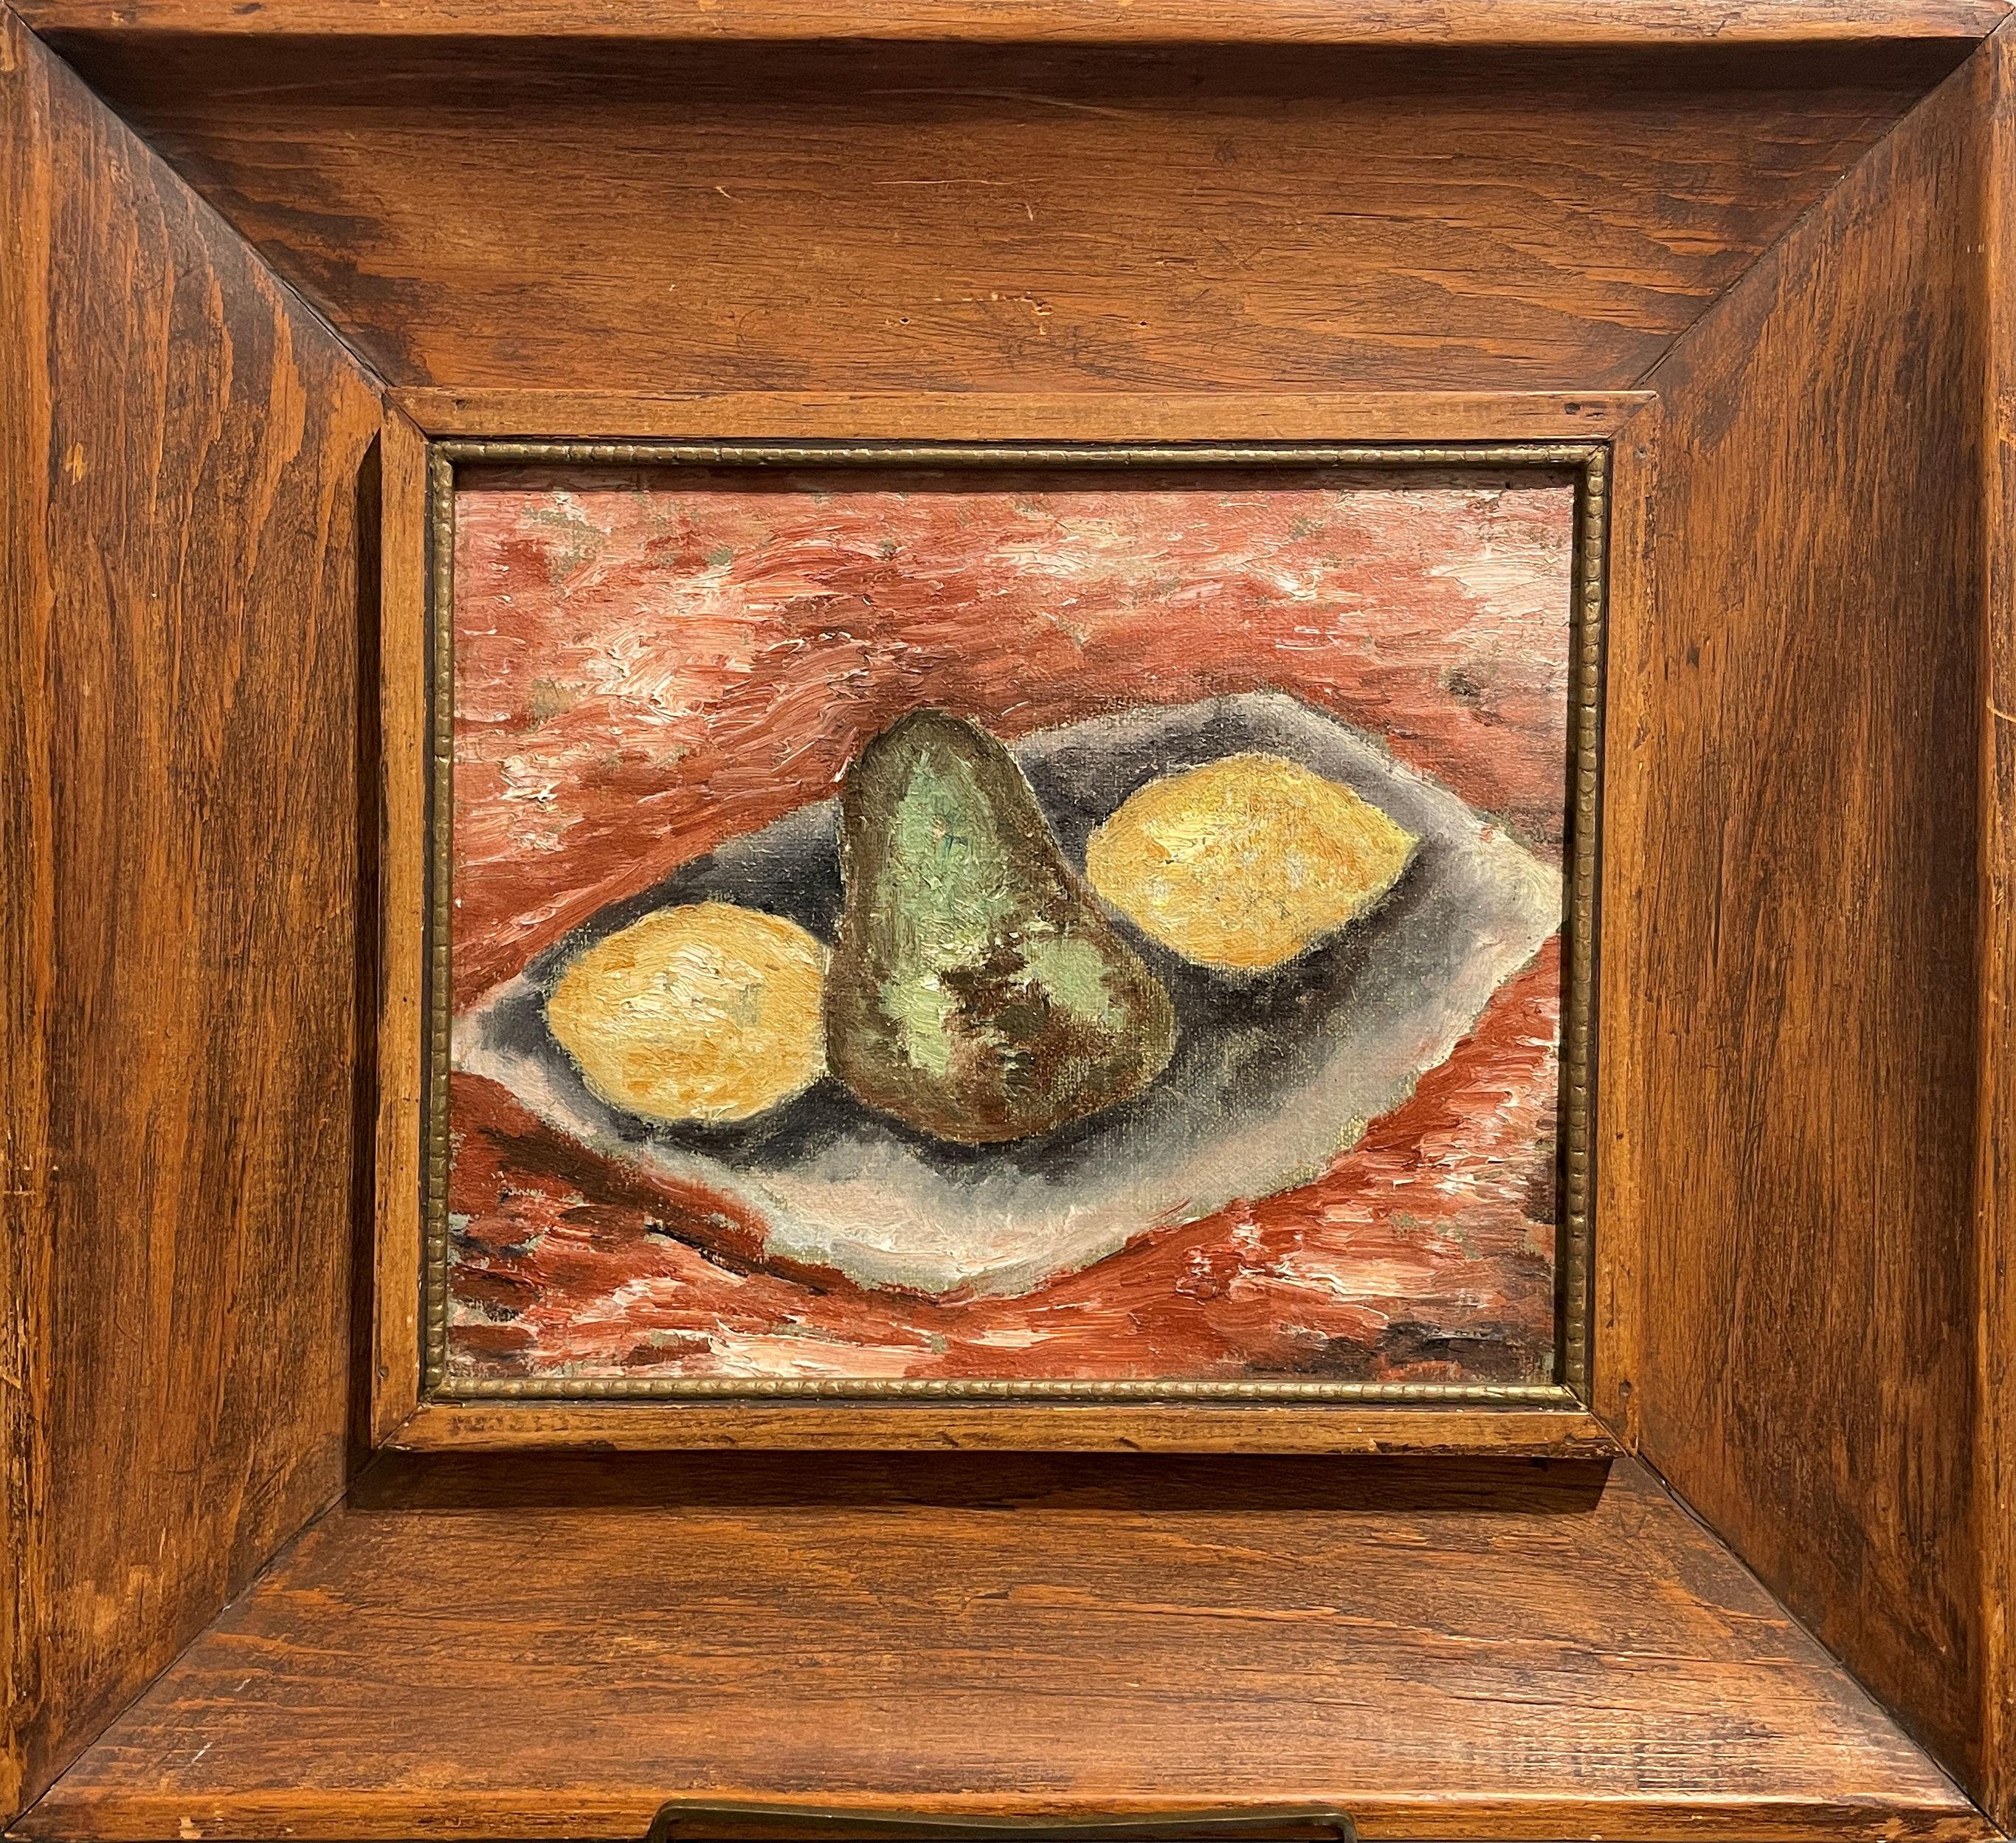 Marsden Hartley
Lemons and Pear, circa 1922-23
Oil on canvas
9 x 10 3/4 inches

Provenance:
Adelaide Shaffer Kuntz, Bronxville (Hartley’s friend and patron)
Bertha Schaefer Gallery, New York (acquired from the above)
Private Collection, Stamford,